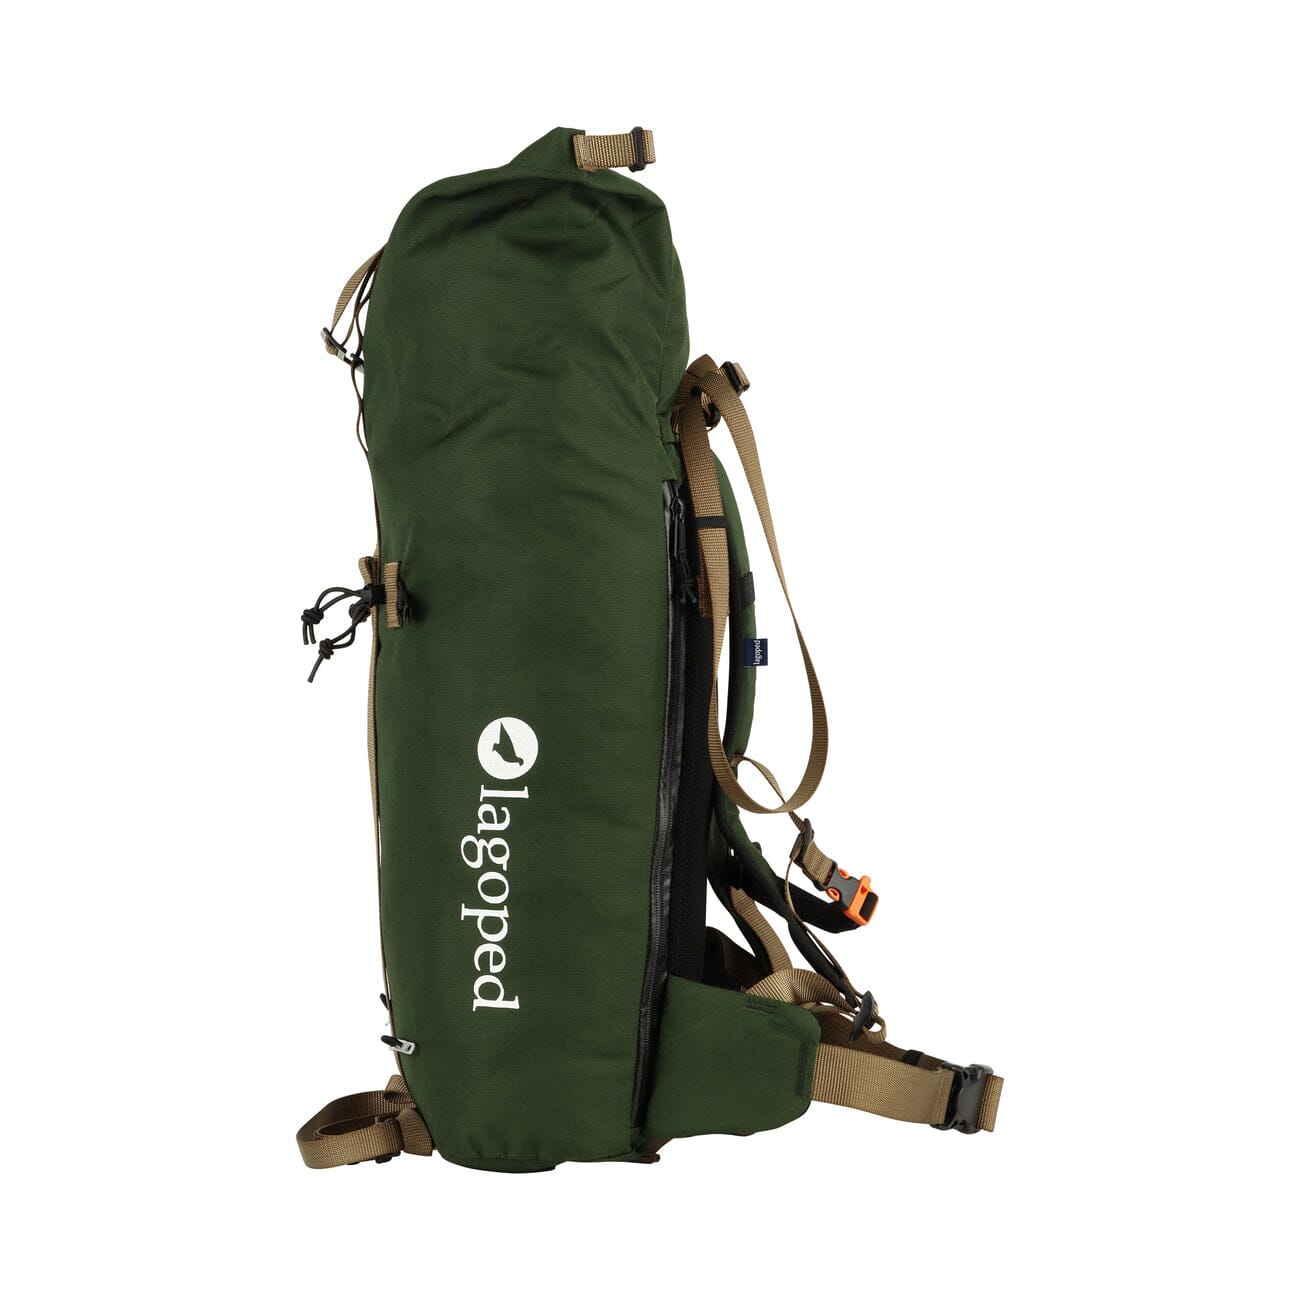 green mountaineering backpack made in france